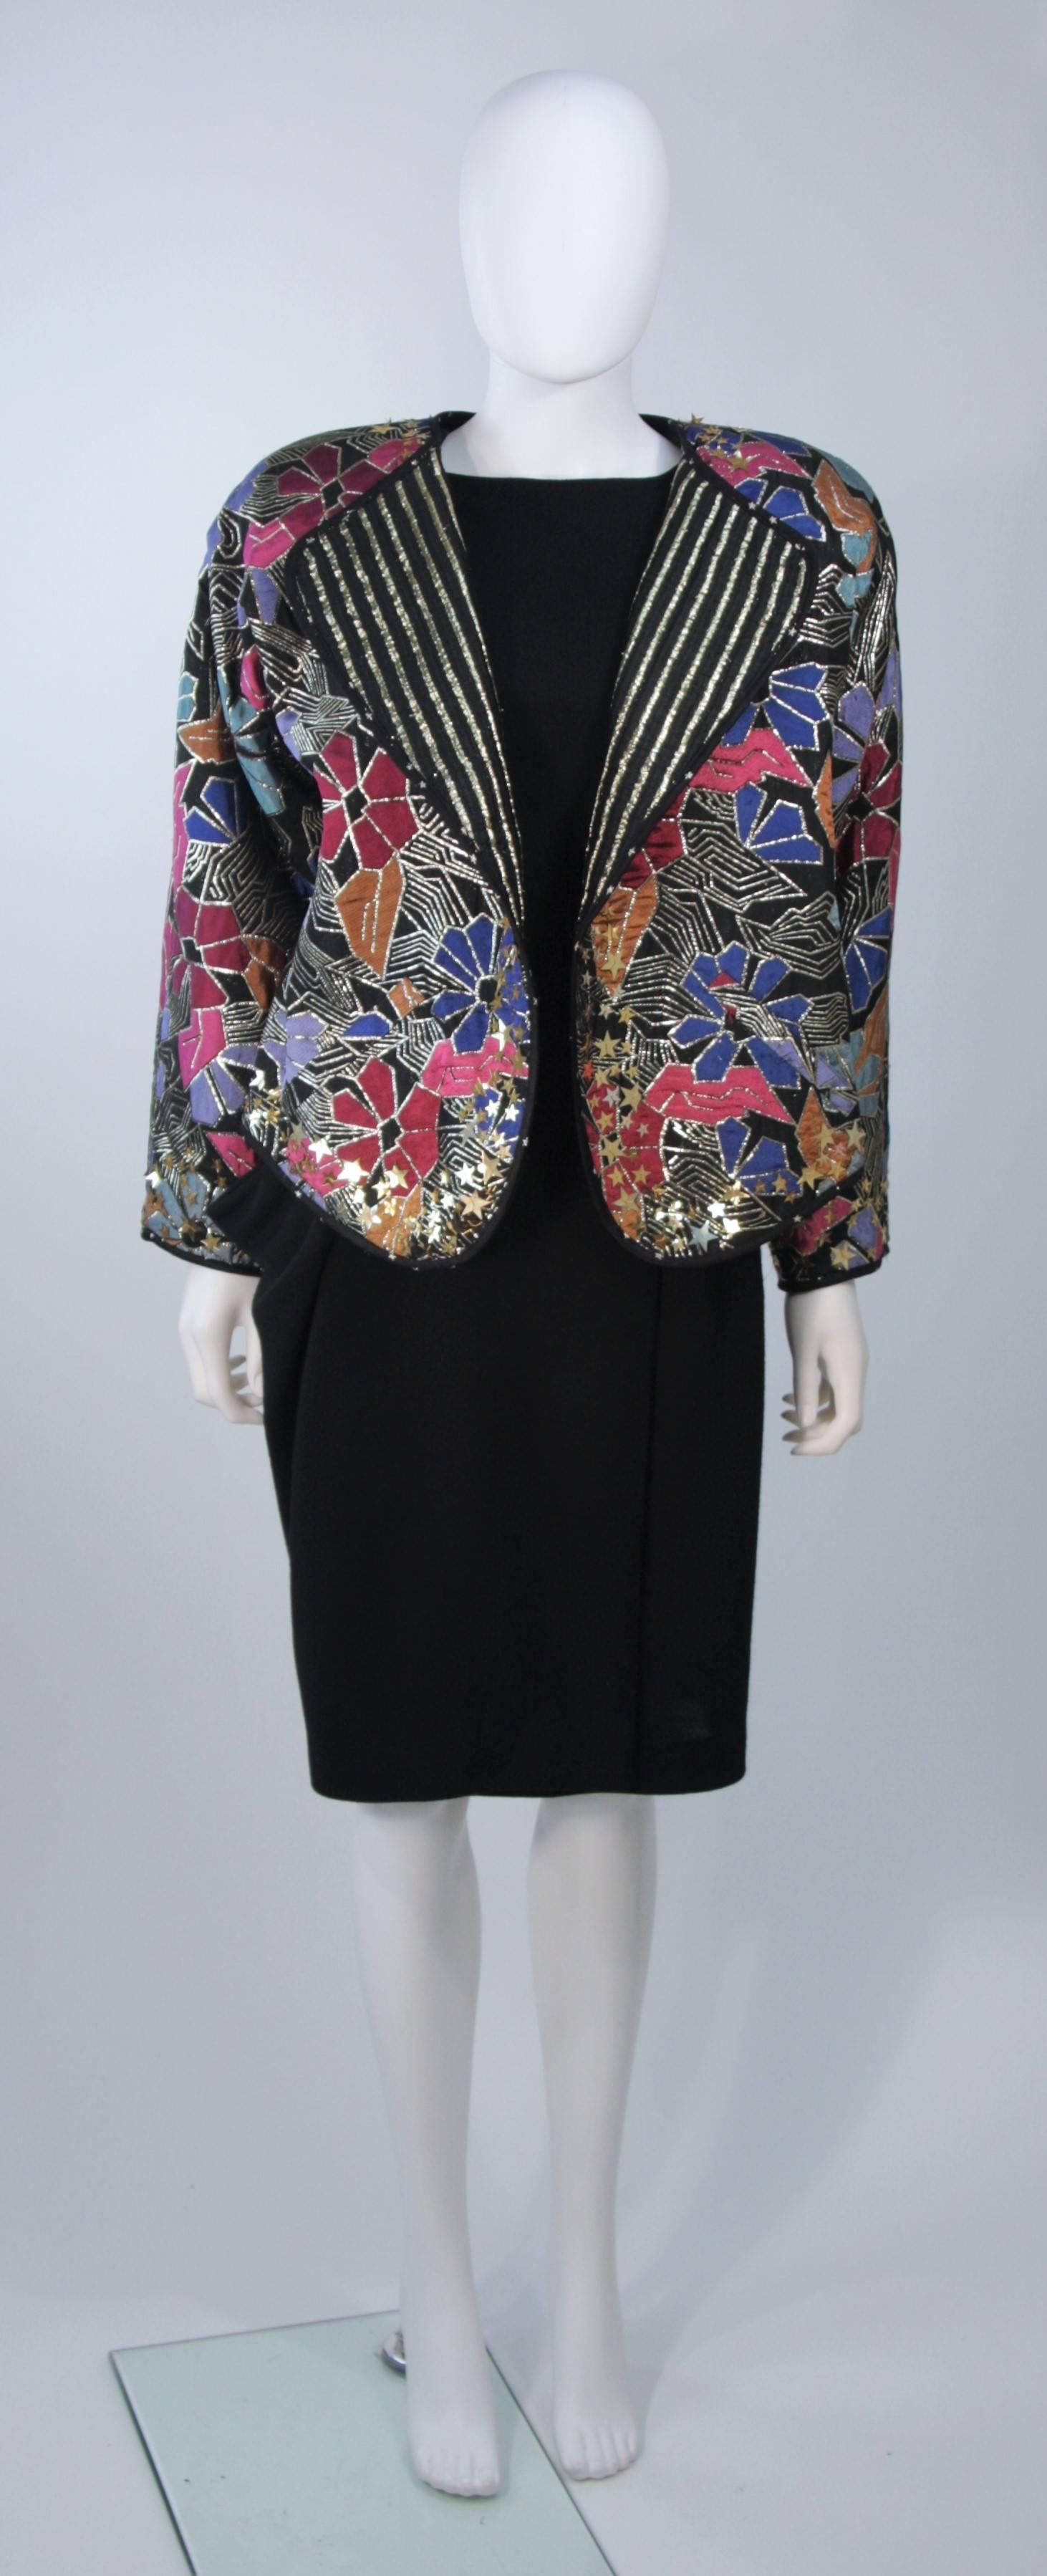  This Geoffrey Beene Couture set is composed of a wonderful draped wool dress with an open back, and a reversible jacket which is adorned with stars. The reversible jacket has attached shoulder pads (which can be removed upon the buyers discretion)